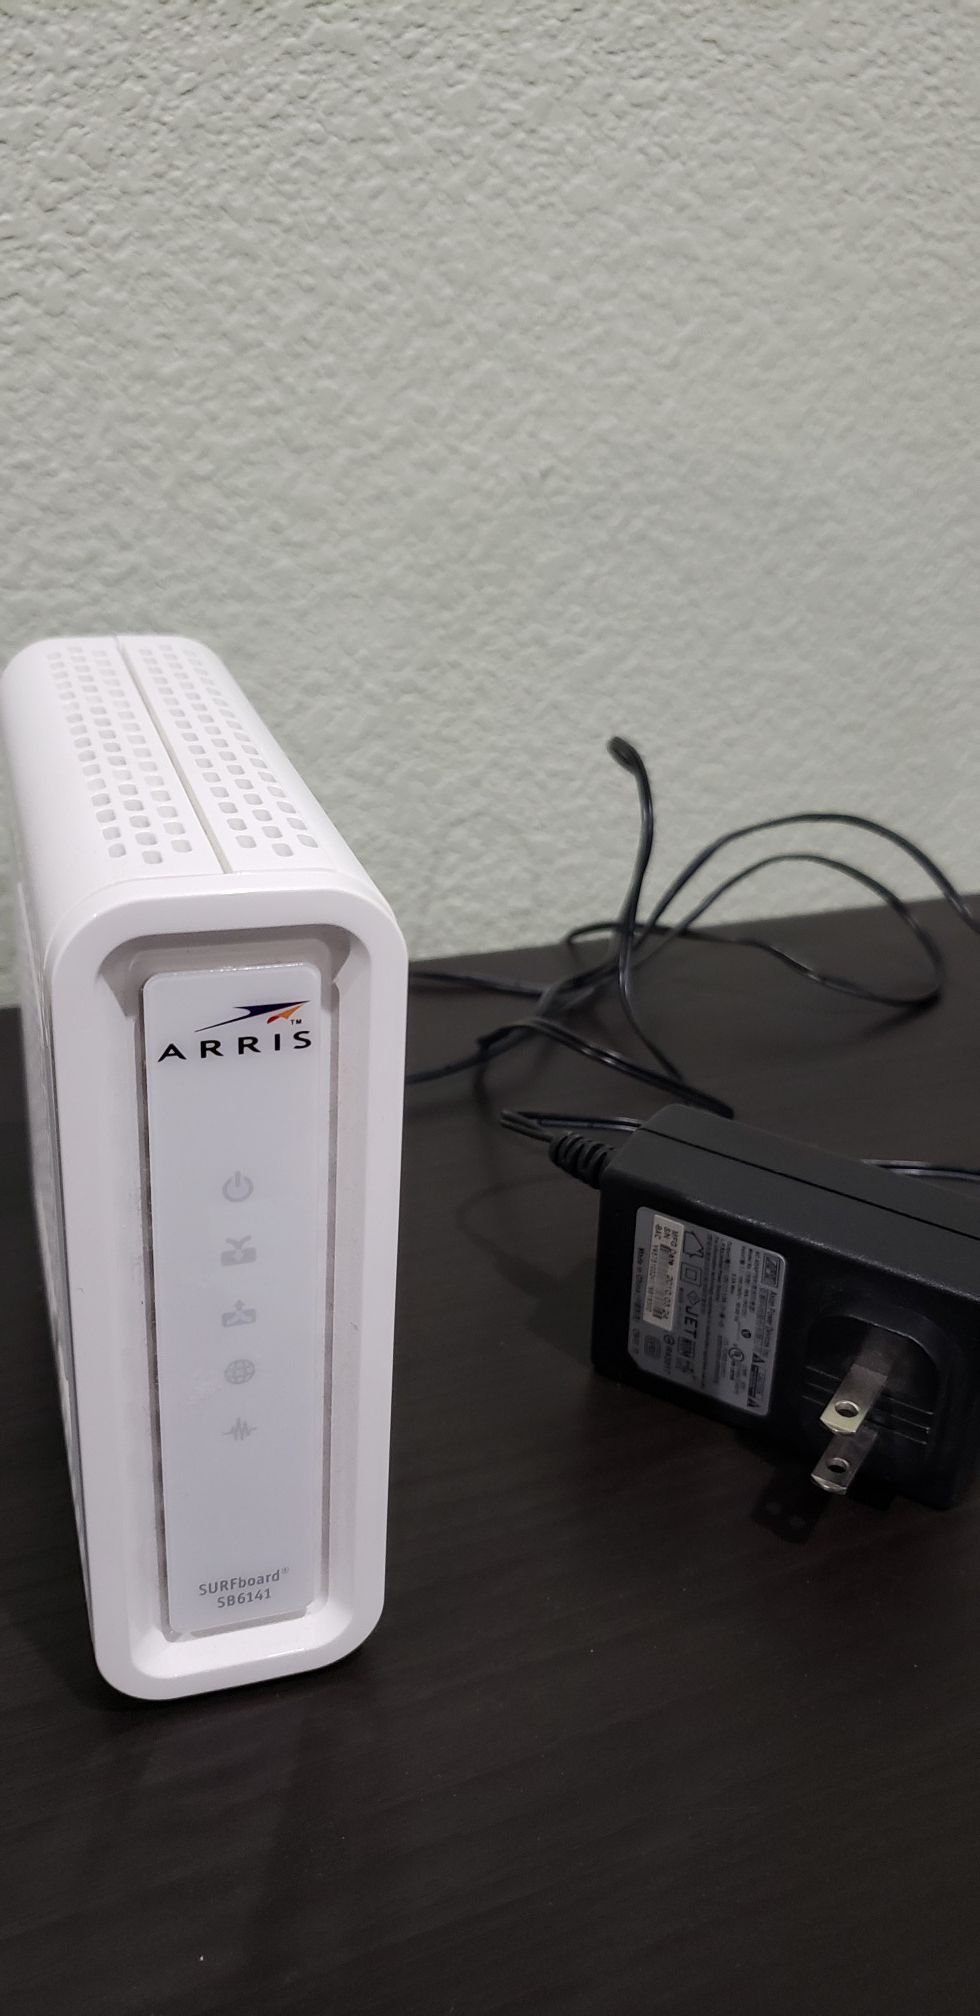 Motorola SB6141 cable modem. Works with Cox.